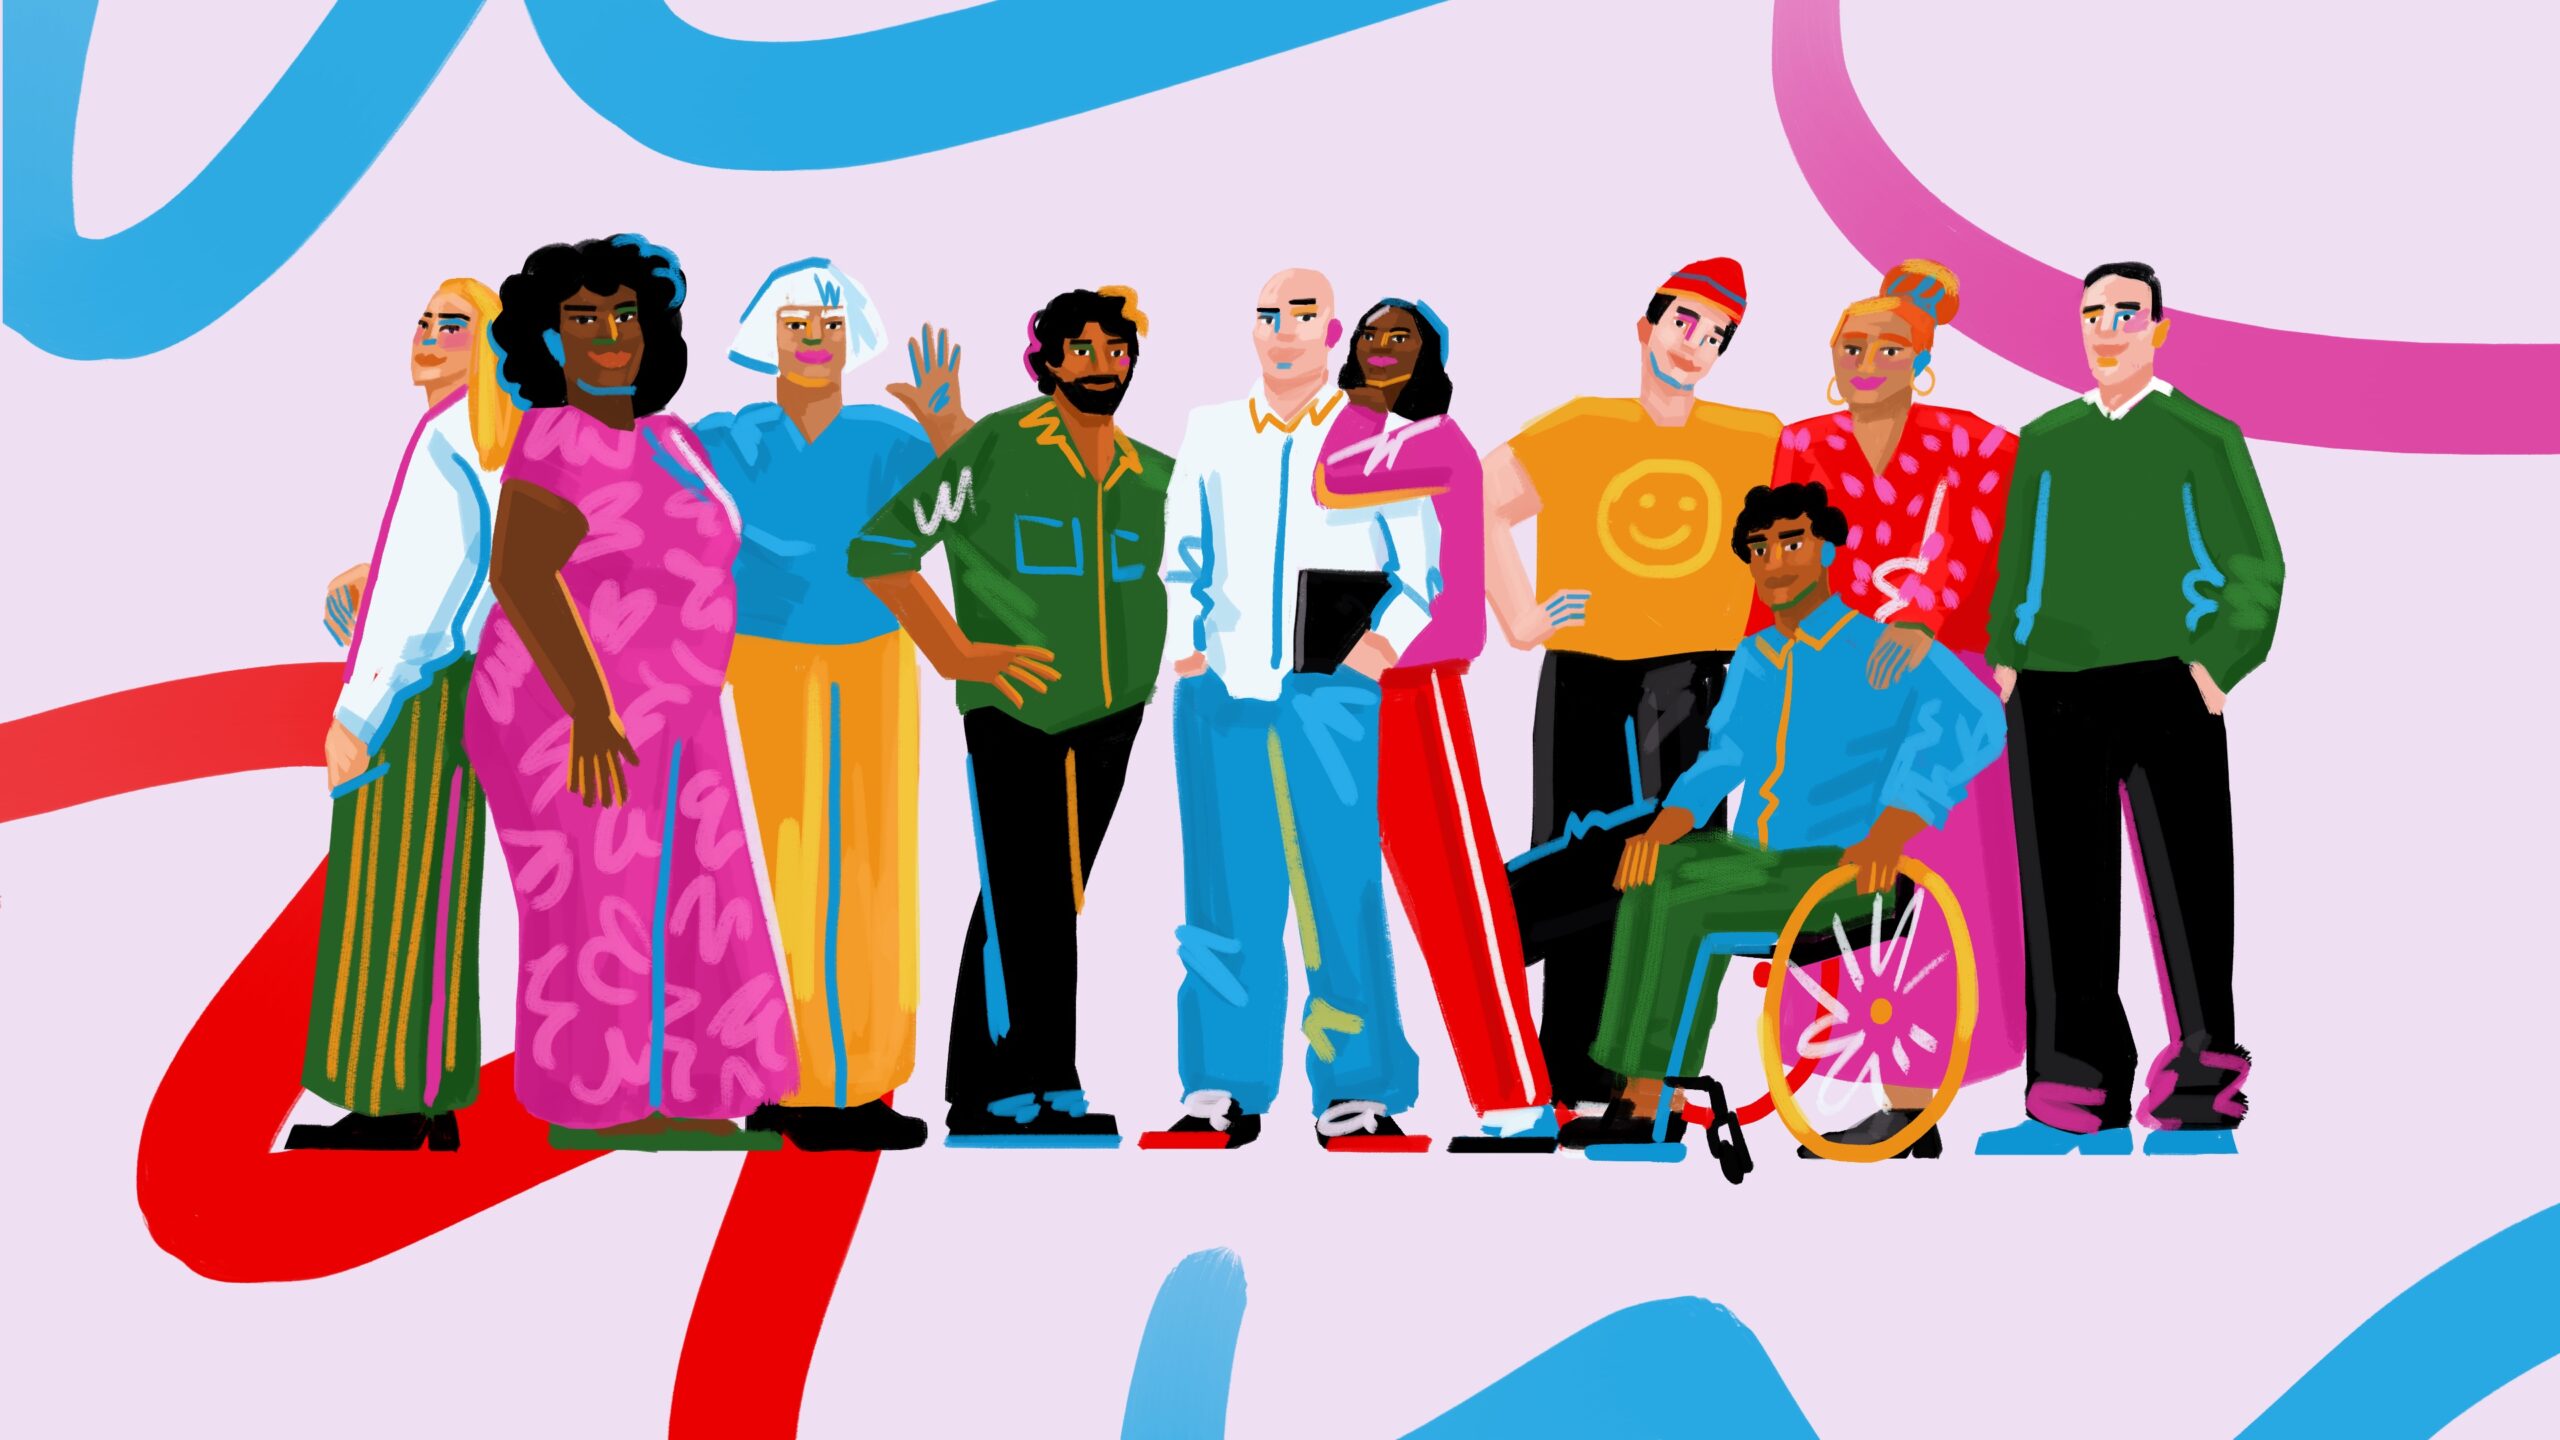 Diverse group of people illustration